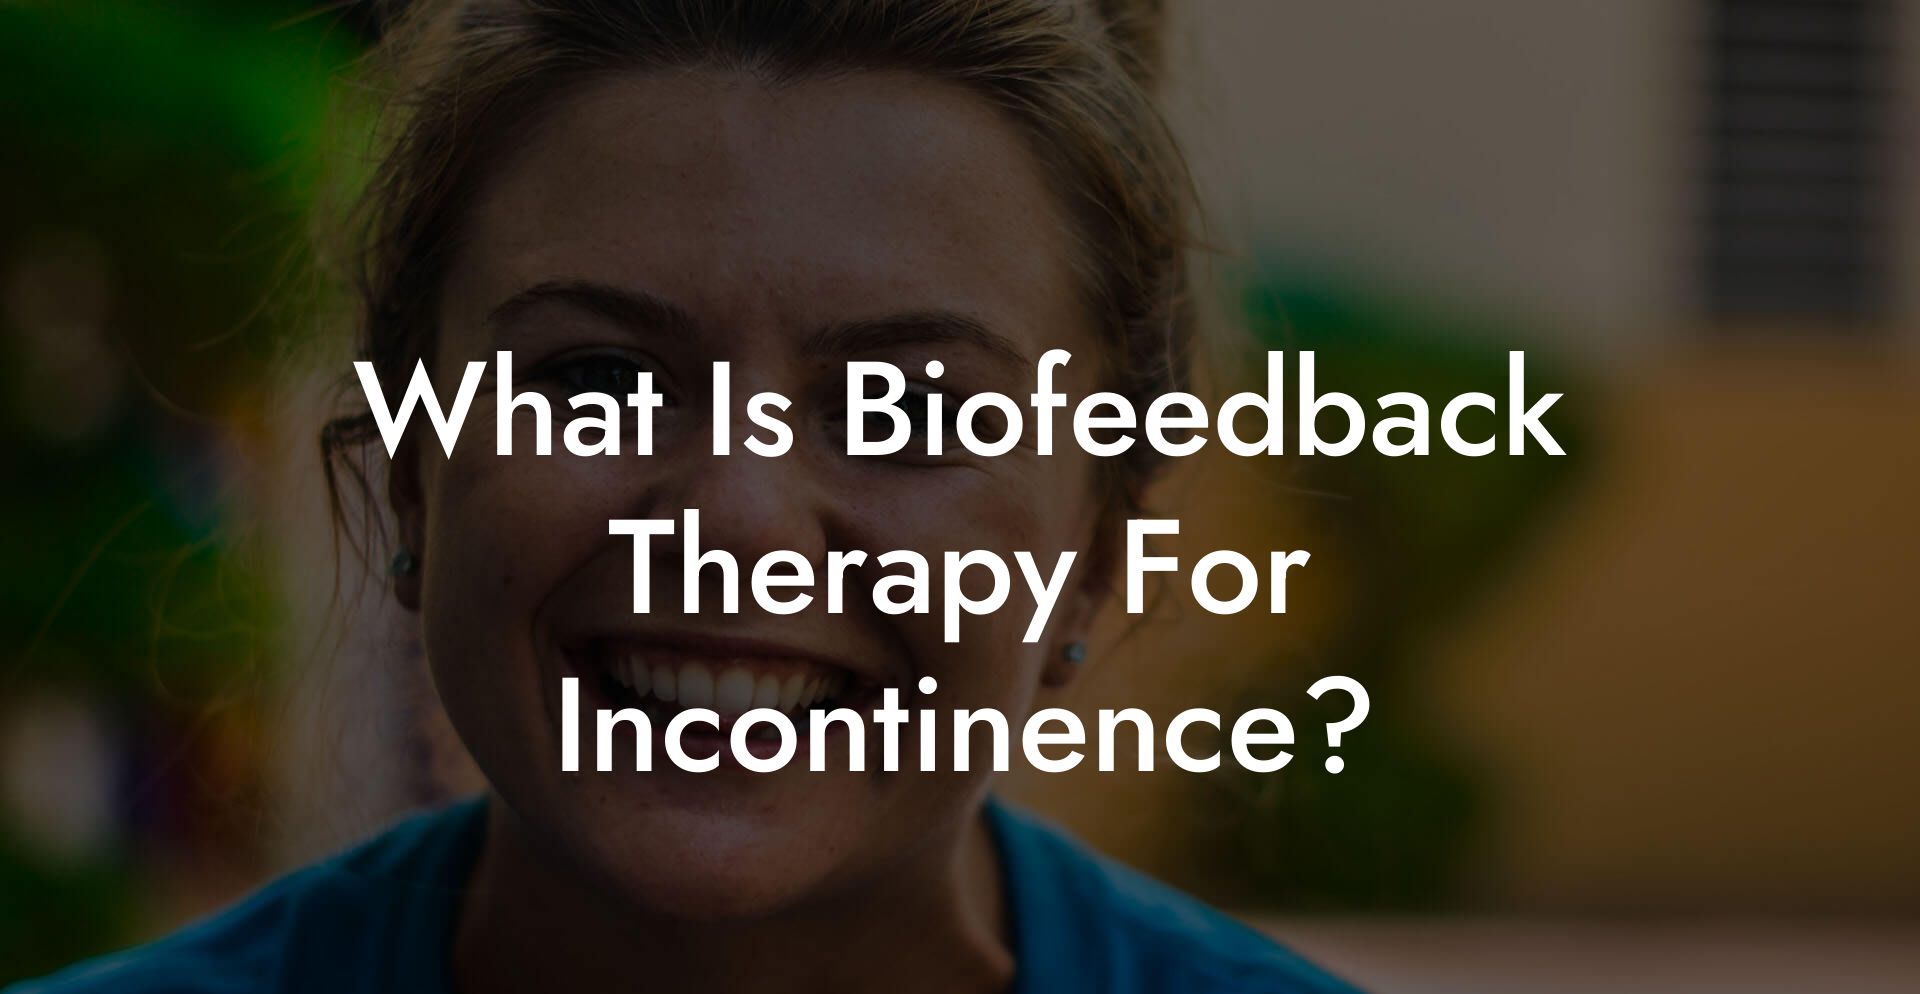 What Is Biofeedback Therapy For Incontinence?